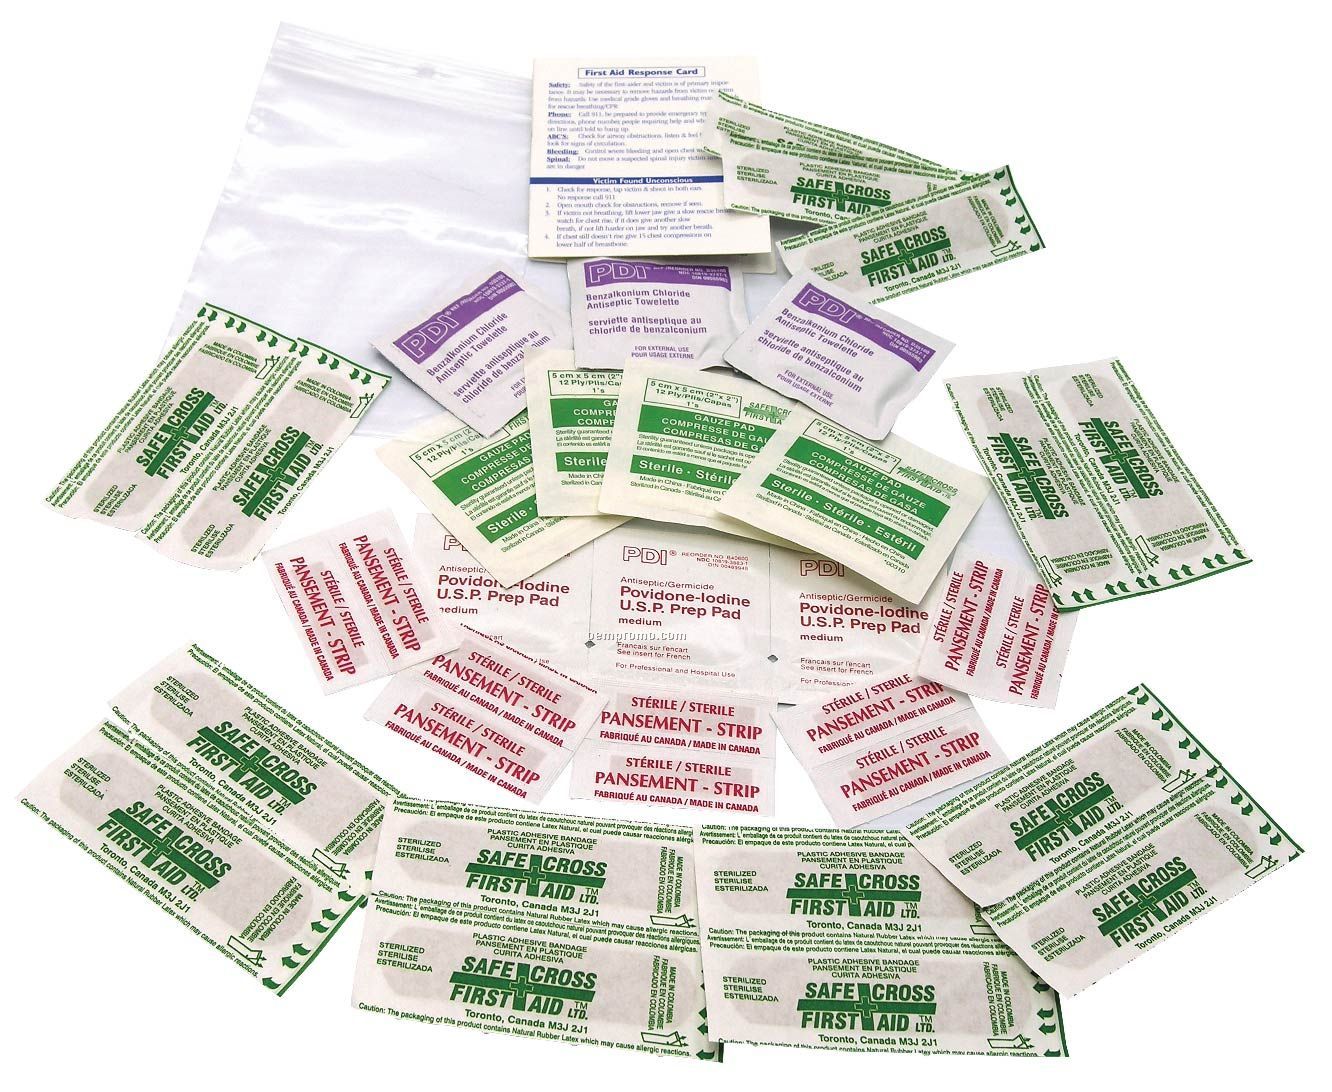 36 Piece First Aid Kit (Blank)